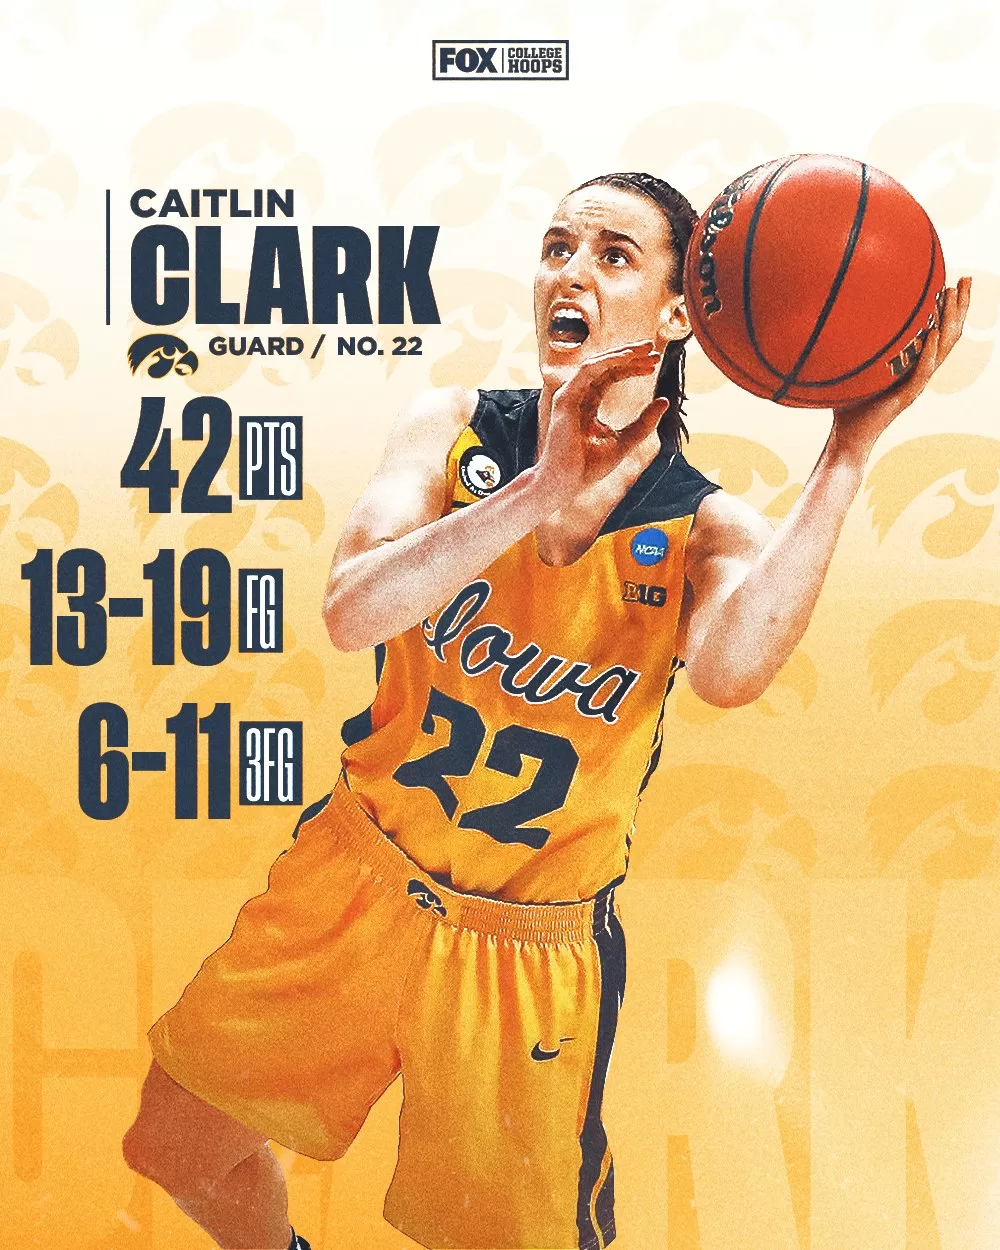 Caitlin Clark wins another National Player of the Year award